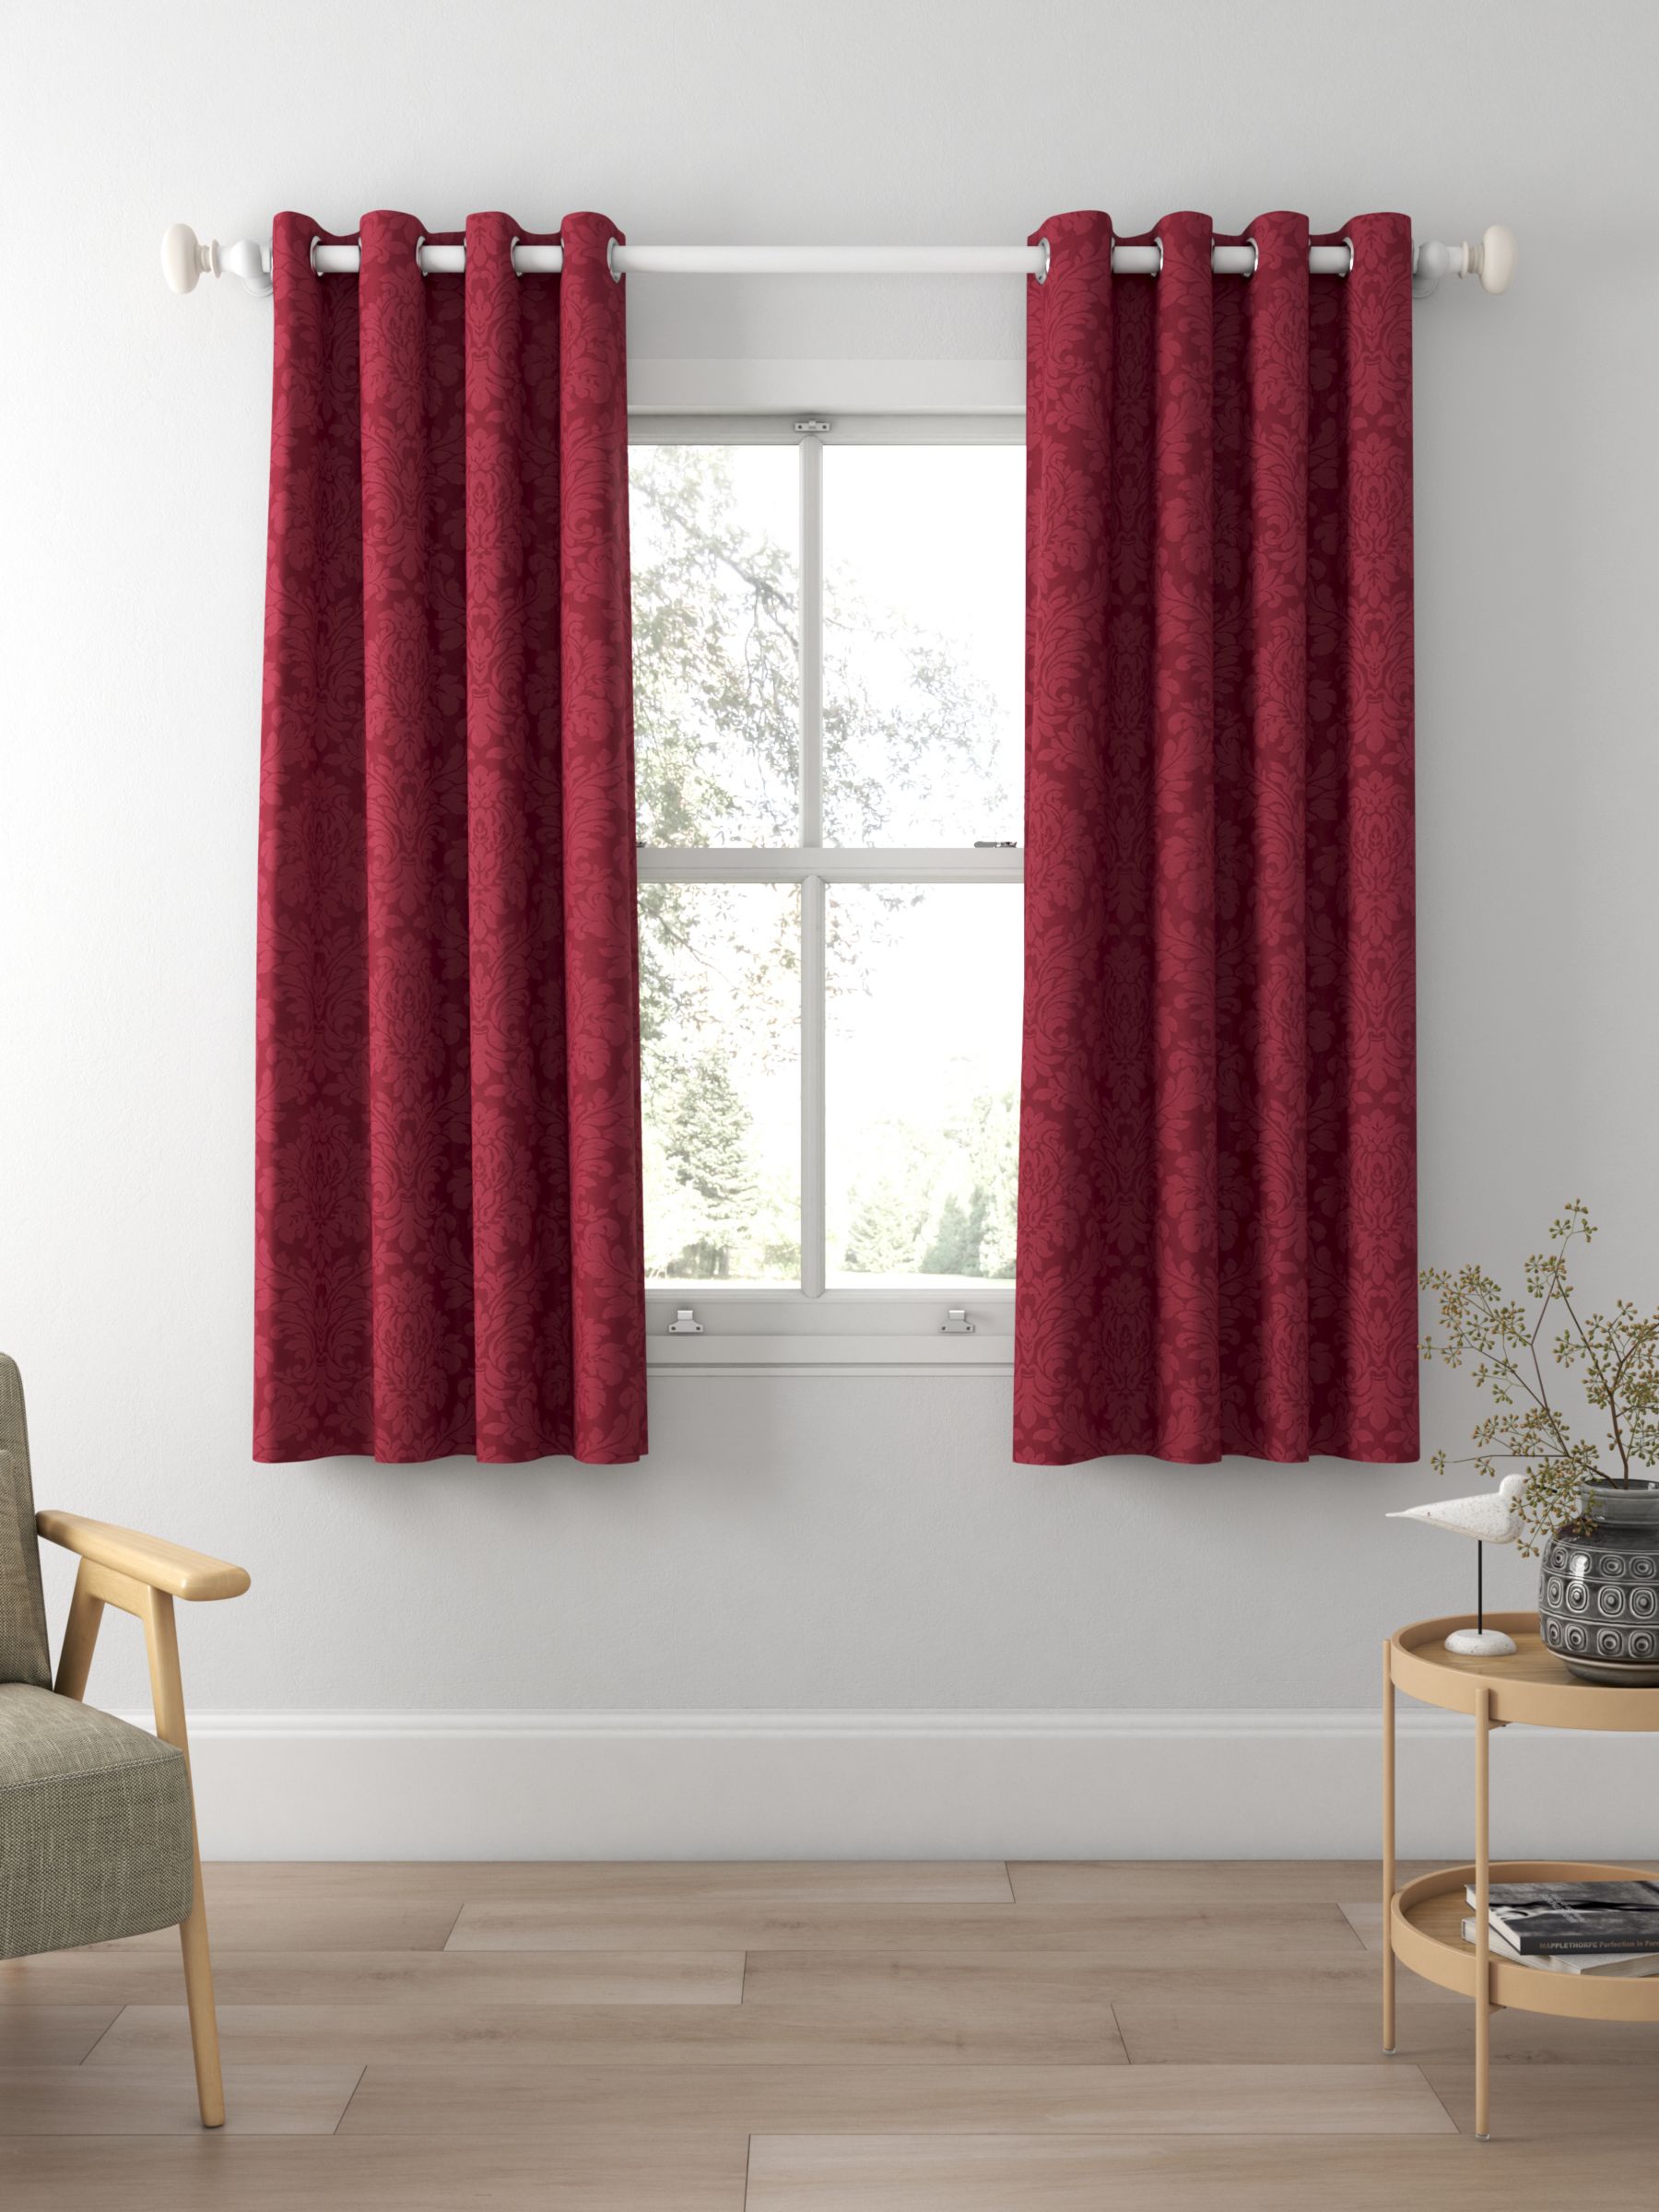 Sanderson Lymington Damask Made to Measure Curtains, Redcurrant